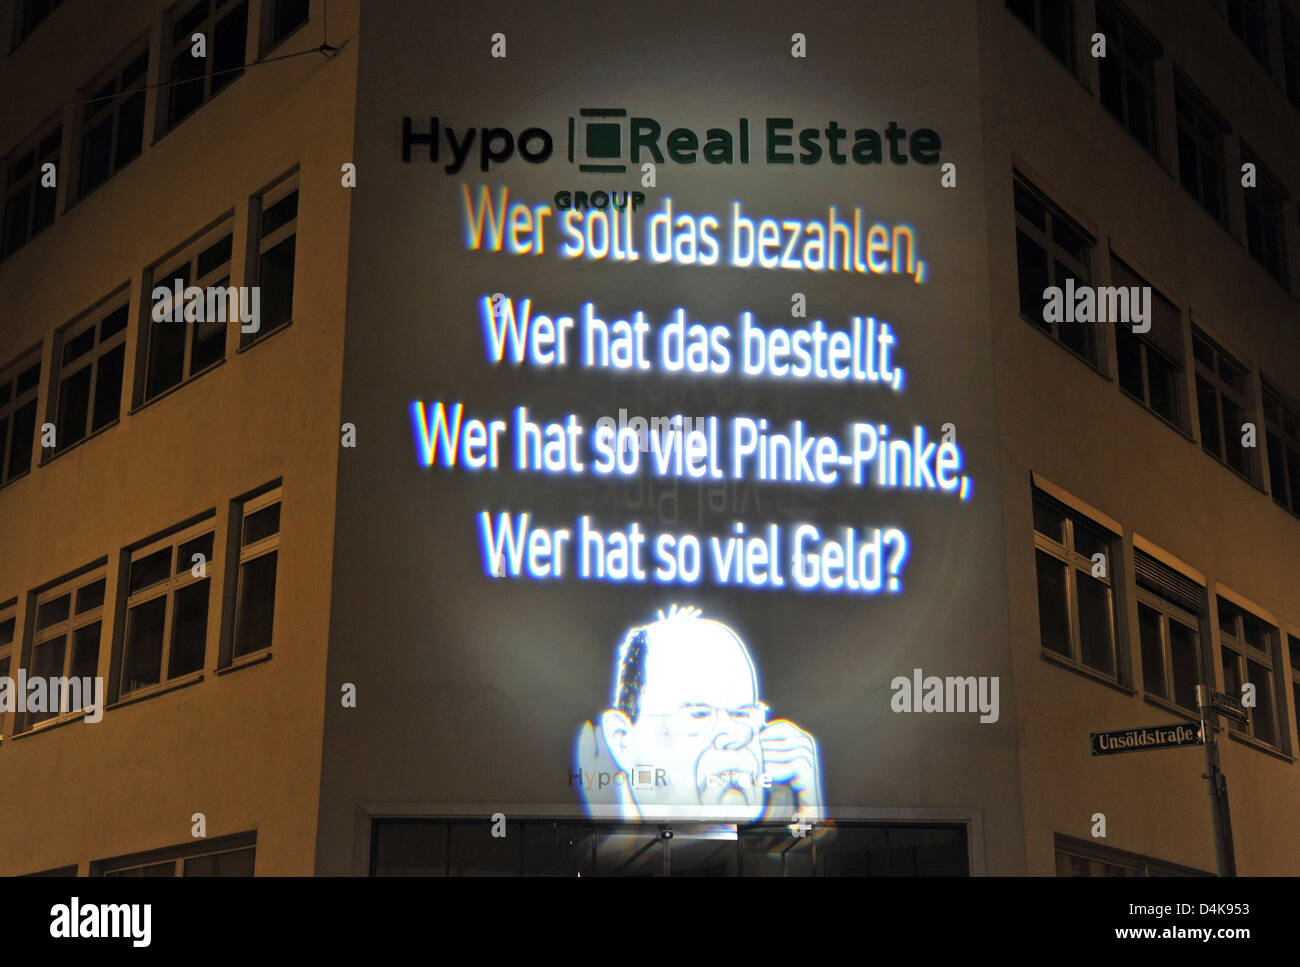 A light installation of artist Oliver Bienkowski is projected to the front of the Hypo Real Estate headquarters in Munich, Germany, 10 April 2009. The sentence ?Wer soll das bezahlen, Wer hat das bestellt, Wer hat so viel Pinke-Pinke, Wer hat so viel Geld?? (lit. ?Who will pay for this, who ordered this, who has this much cheeze, who has this much money??) is written above a carica Stock Photo